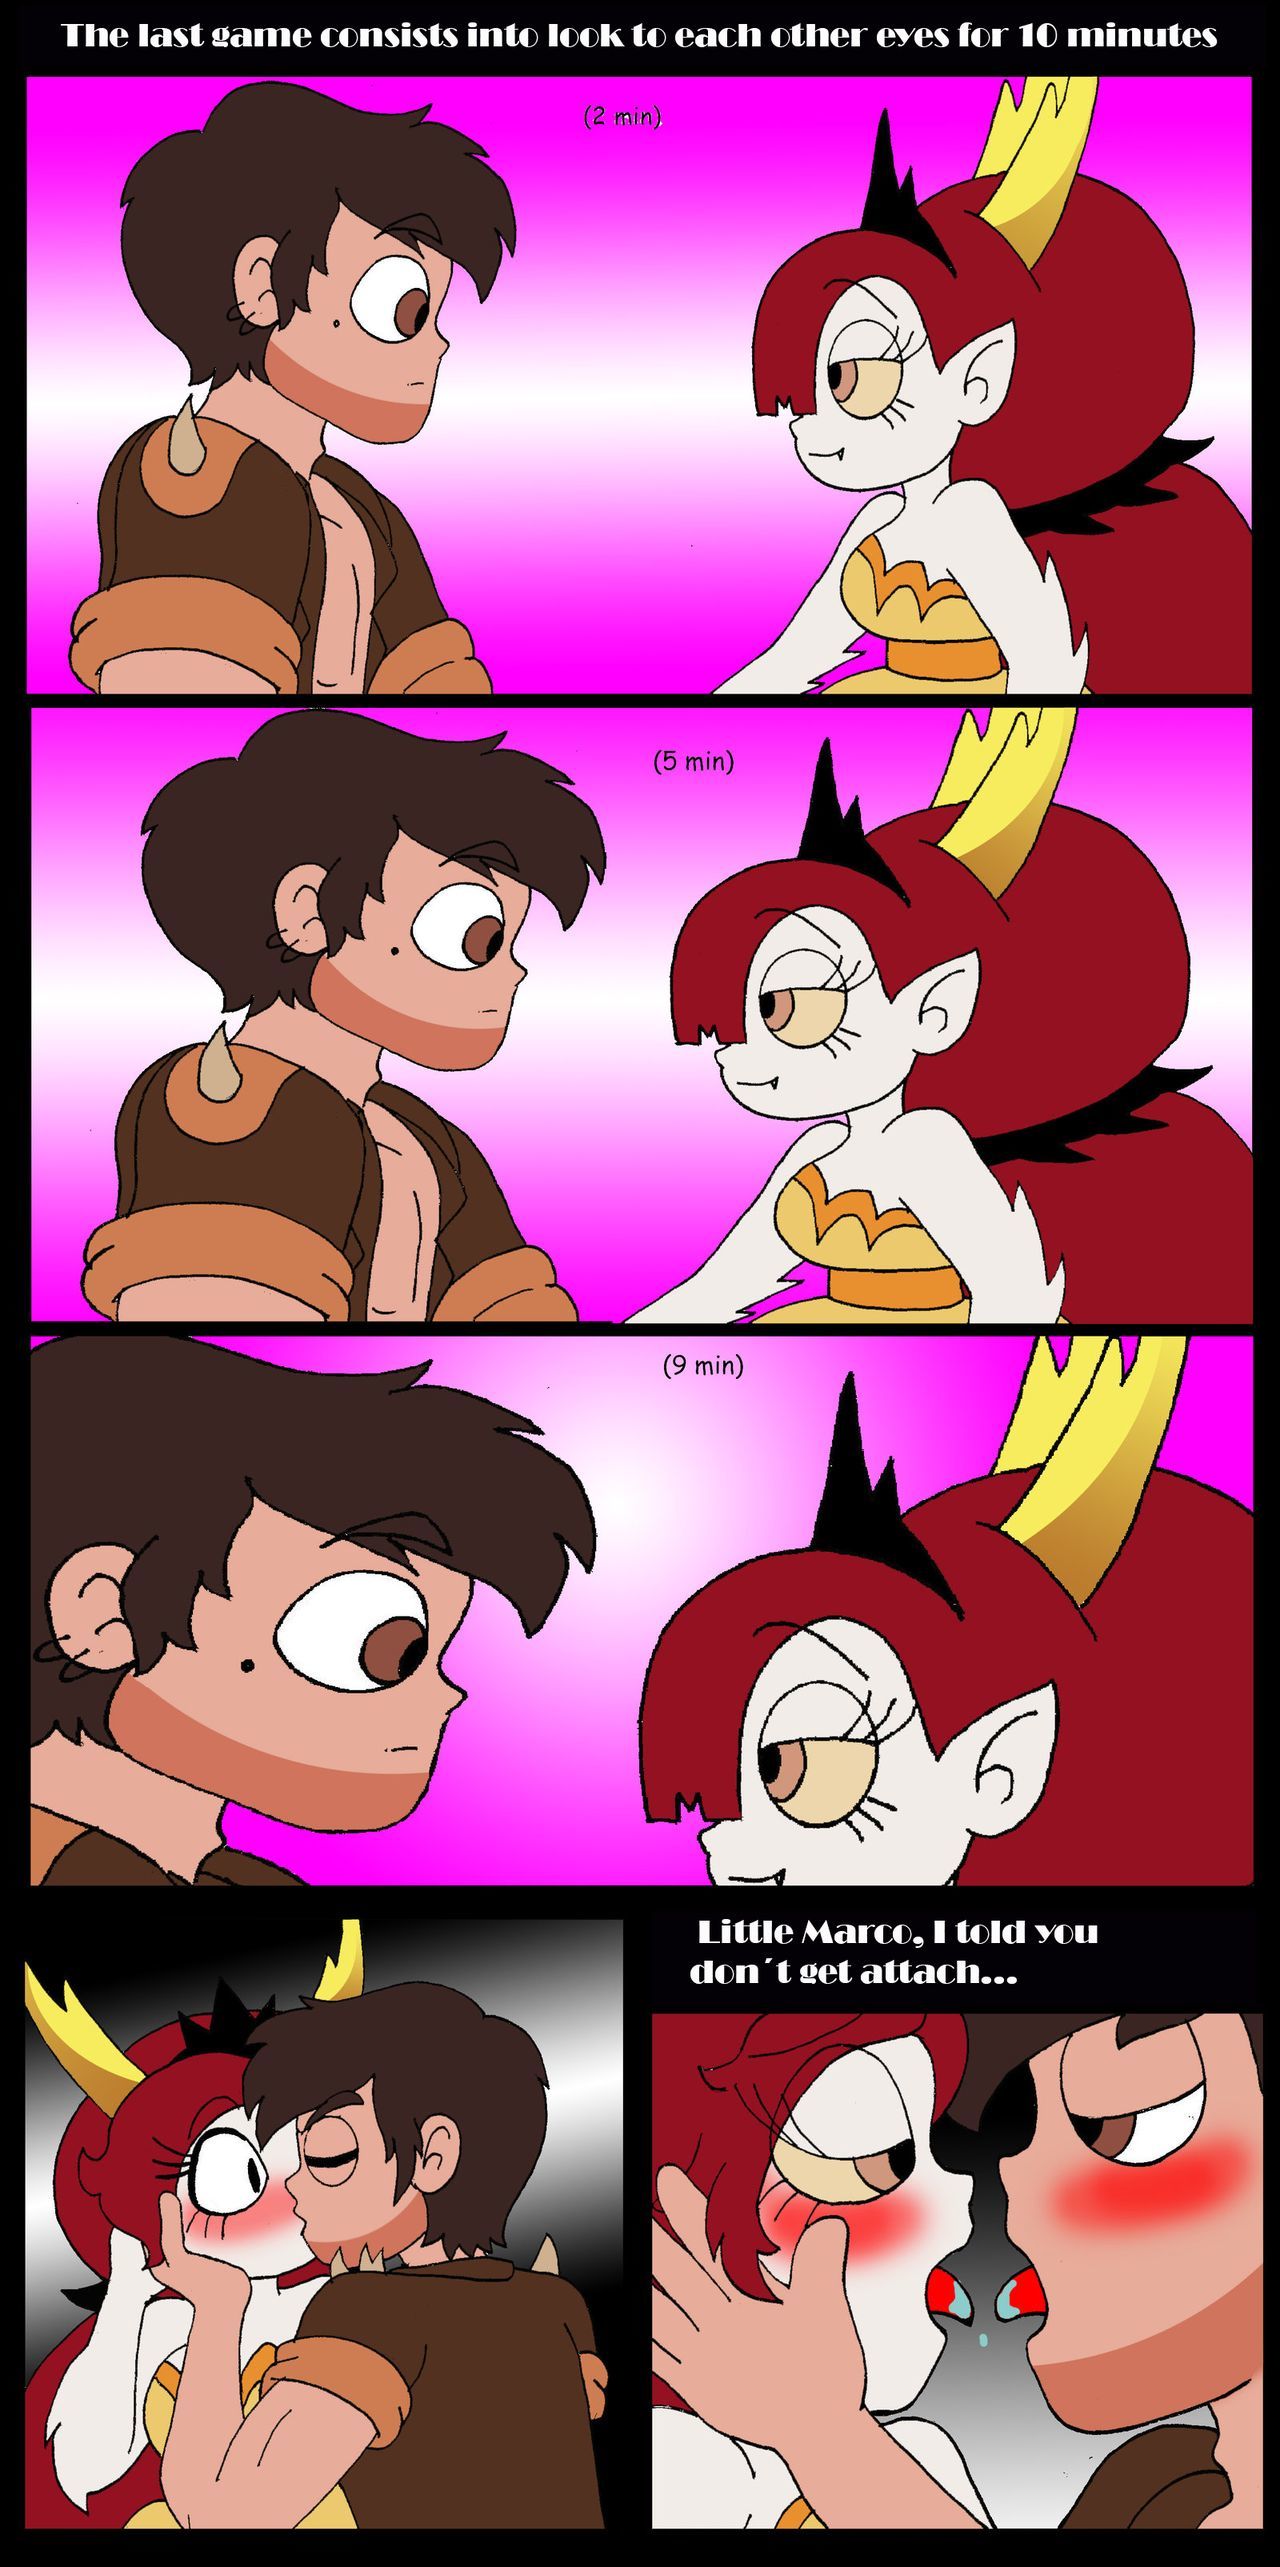 Playing with Fire (Star vs. the Forces of Evil) by Ferozyraptor page 9